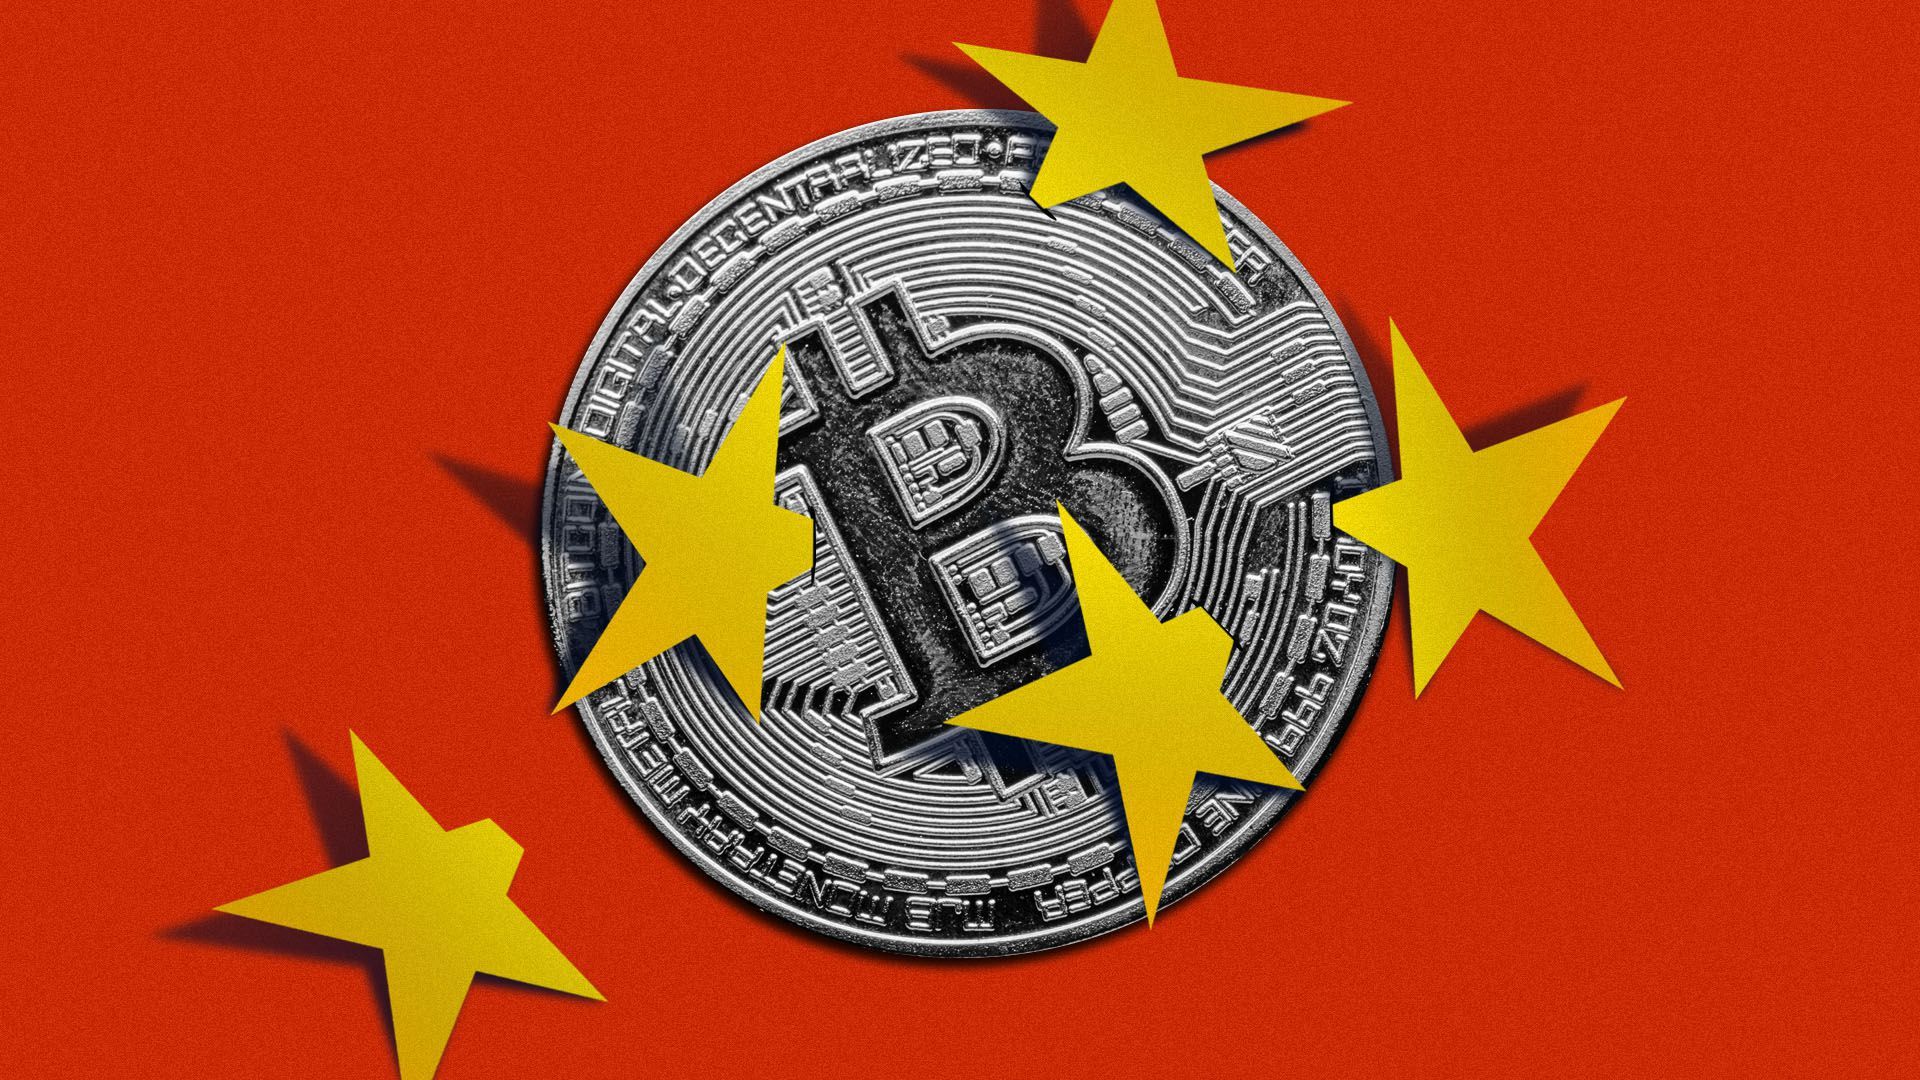 China's cryptocurrency ban clouds the dream of decentralized finance - Axios